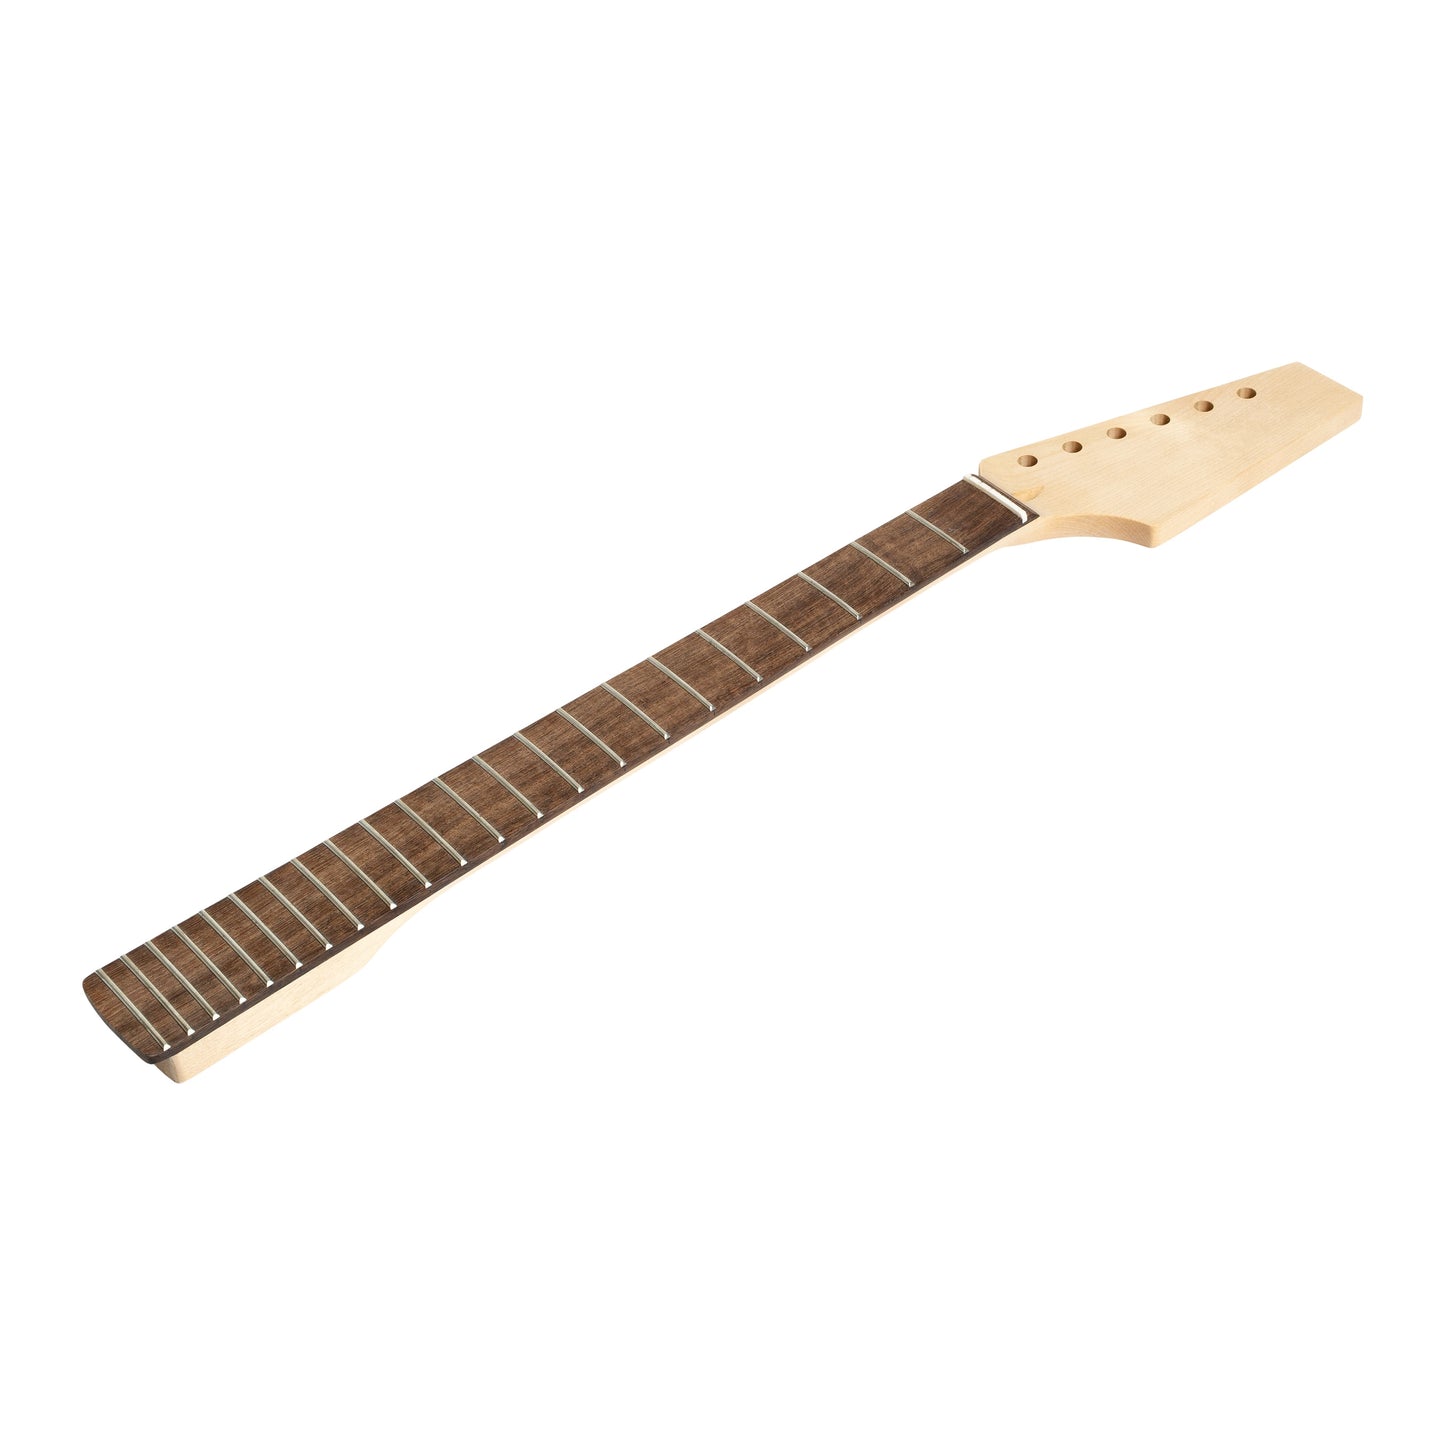 AE Guitars® S-Style Guitar Neck 22 Frets Rosewood No Inlay